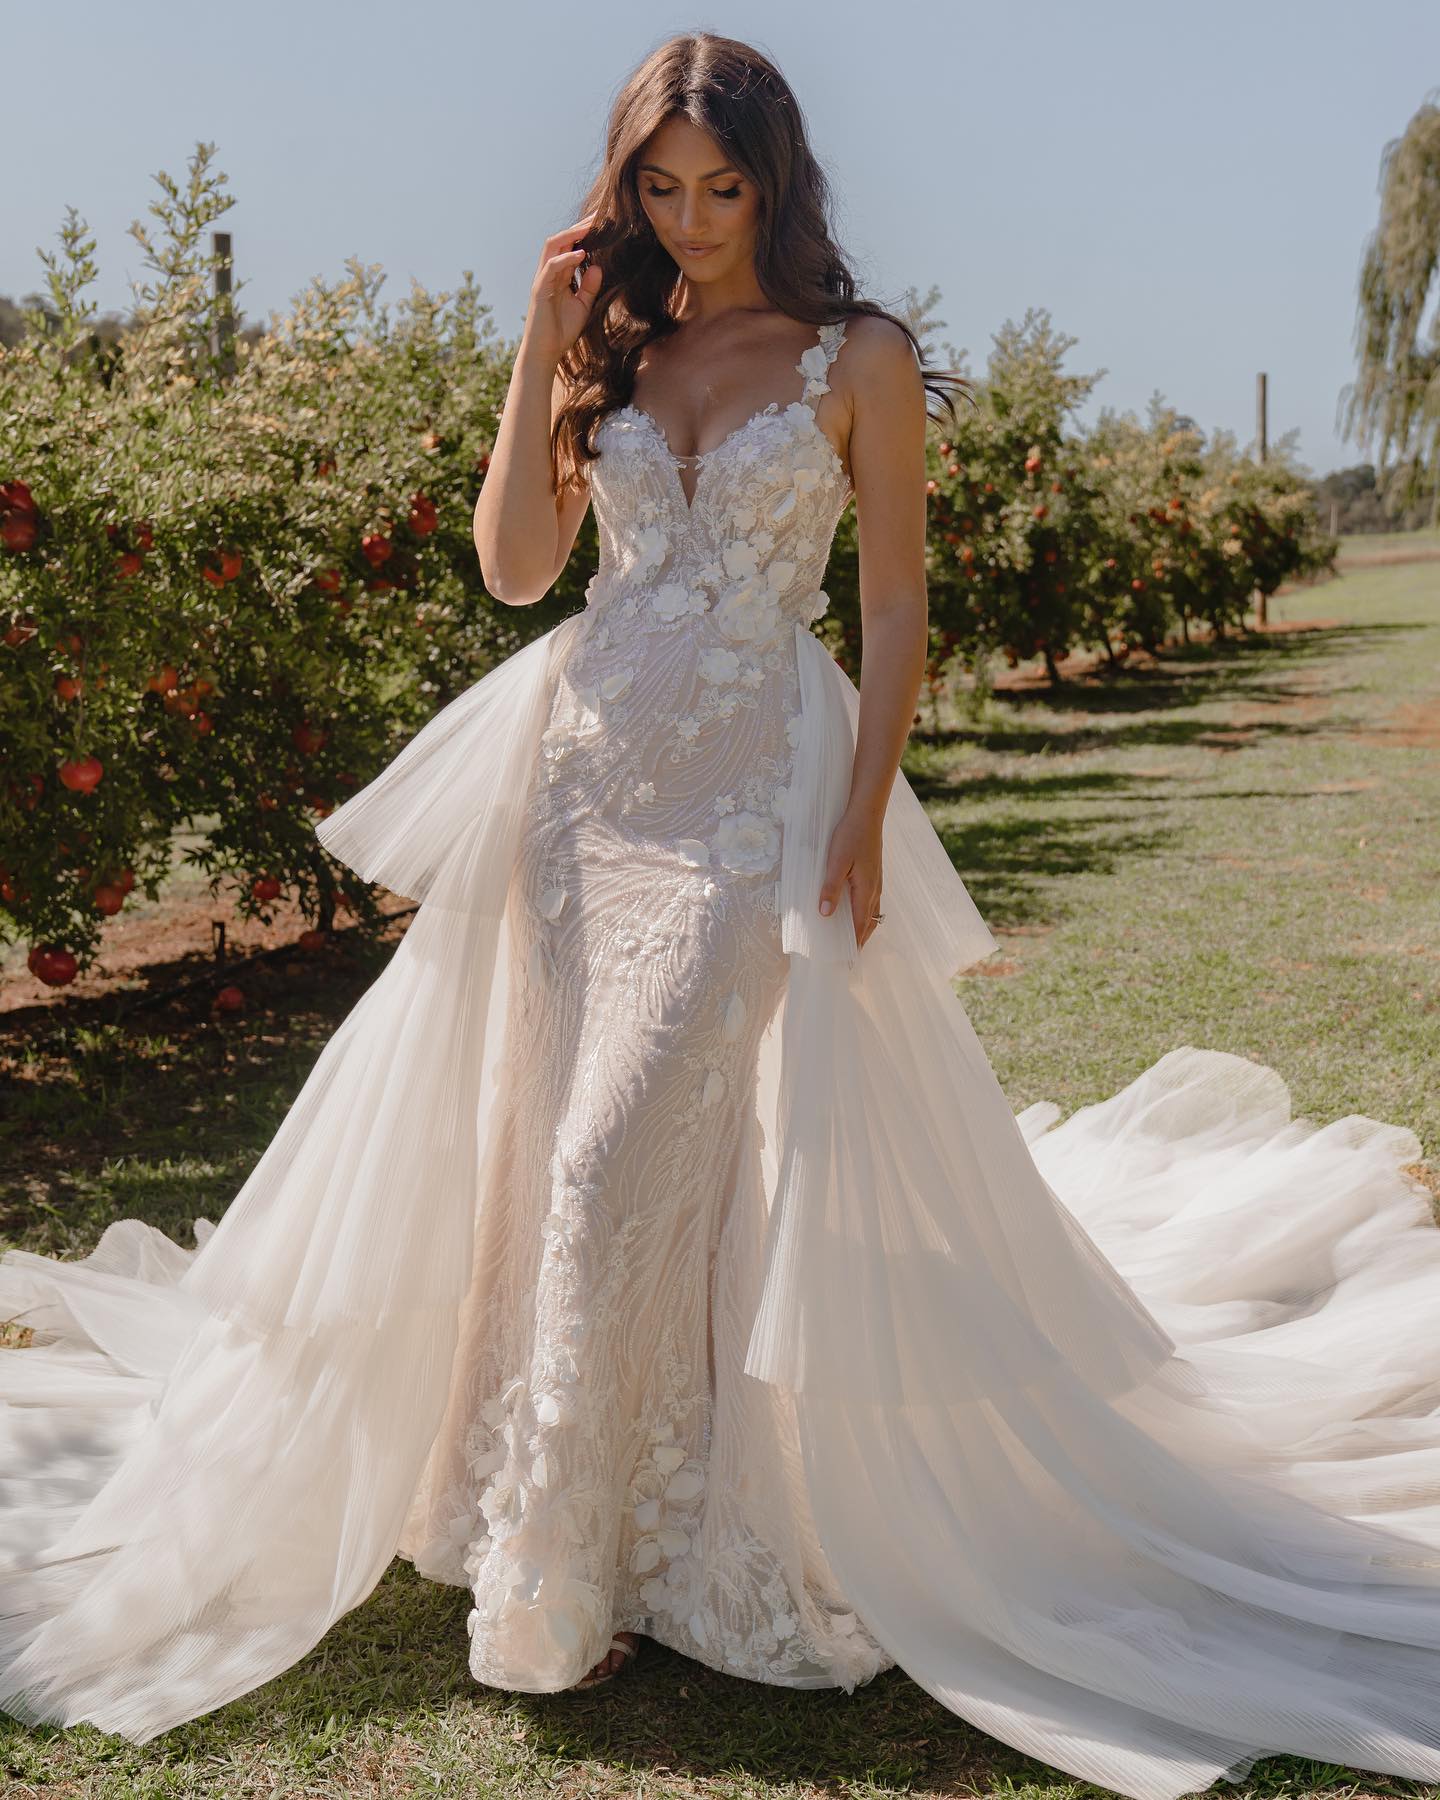 Meet SUZETTE ◊This absolute double stunner by @madilanebridal gives two looks to your day with her detachable overskirt train … bringing texture & drama to your ceremony before wowing your guests with your glam fitted style underneath for the dancefloor ◊Ready to try on now at our Newcastle Boutique ◊#youarepreciousbridal #bridalstudio #newcastlebride #bride #bridalgown #bridalinspo #weddingdress #bride2025 #2024bride #bride2024 #bridalstyle #stylishbride  #bohobride #modernbride #yestothedress #youarepreciousloves #dressoftheday #isaidyes #weddingdressgoals #dressgoals #dreamweddingdress #designerbridal #elegantwedding #madilane #suzettemadilane #charltonhall #lepetitchateau #lartingtonhall